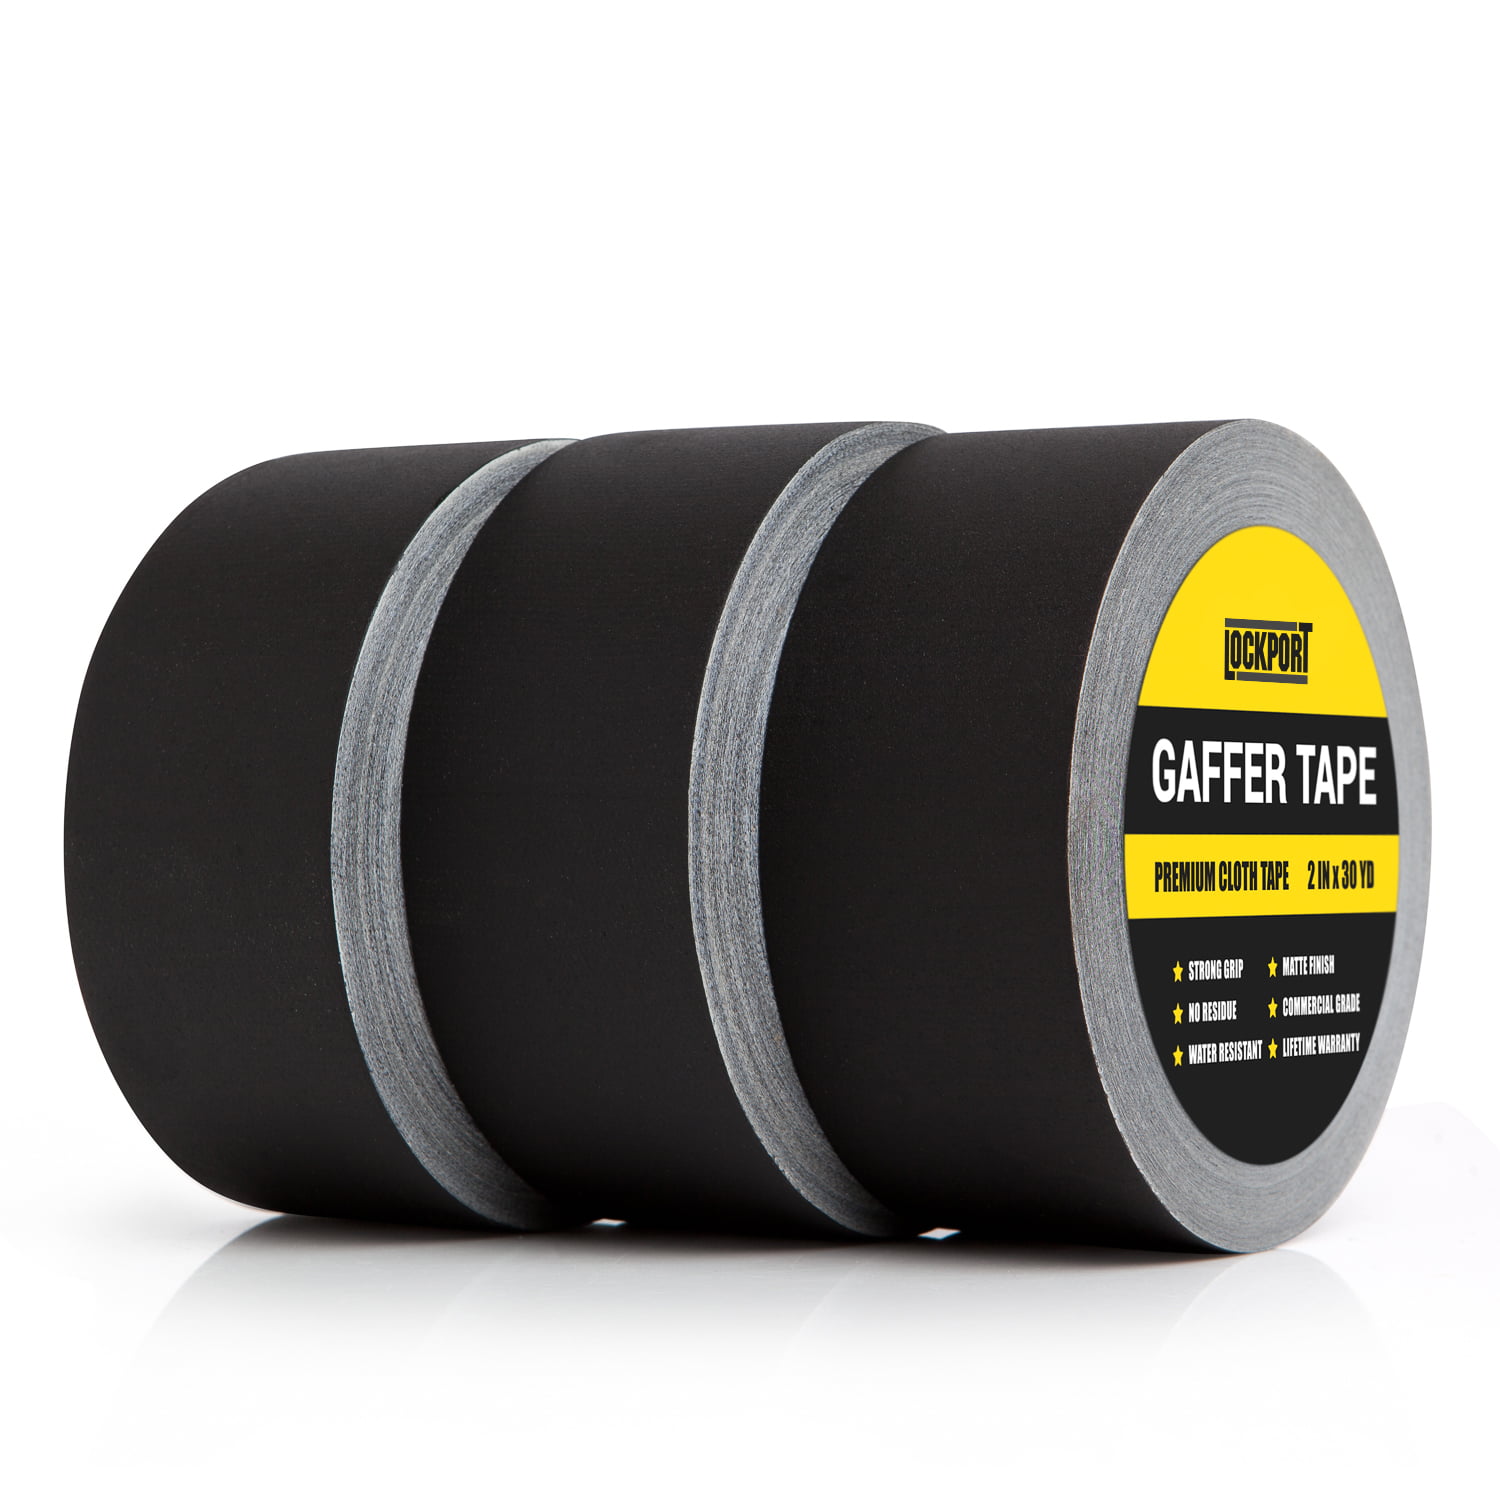 Non-Reflective Pro No Residue 30 Yards x 3 Inches Wide Gaff Cloth Tape for Photography New: Lockport Black Gaffers Tape 3 Pack Filming Backdrop Waterproof Easy Tear Matte Gaffer Stage Tape 